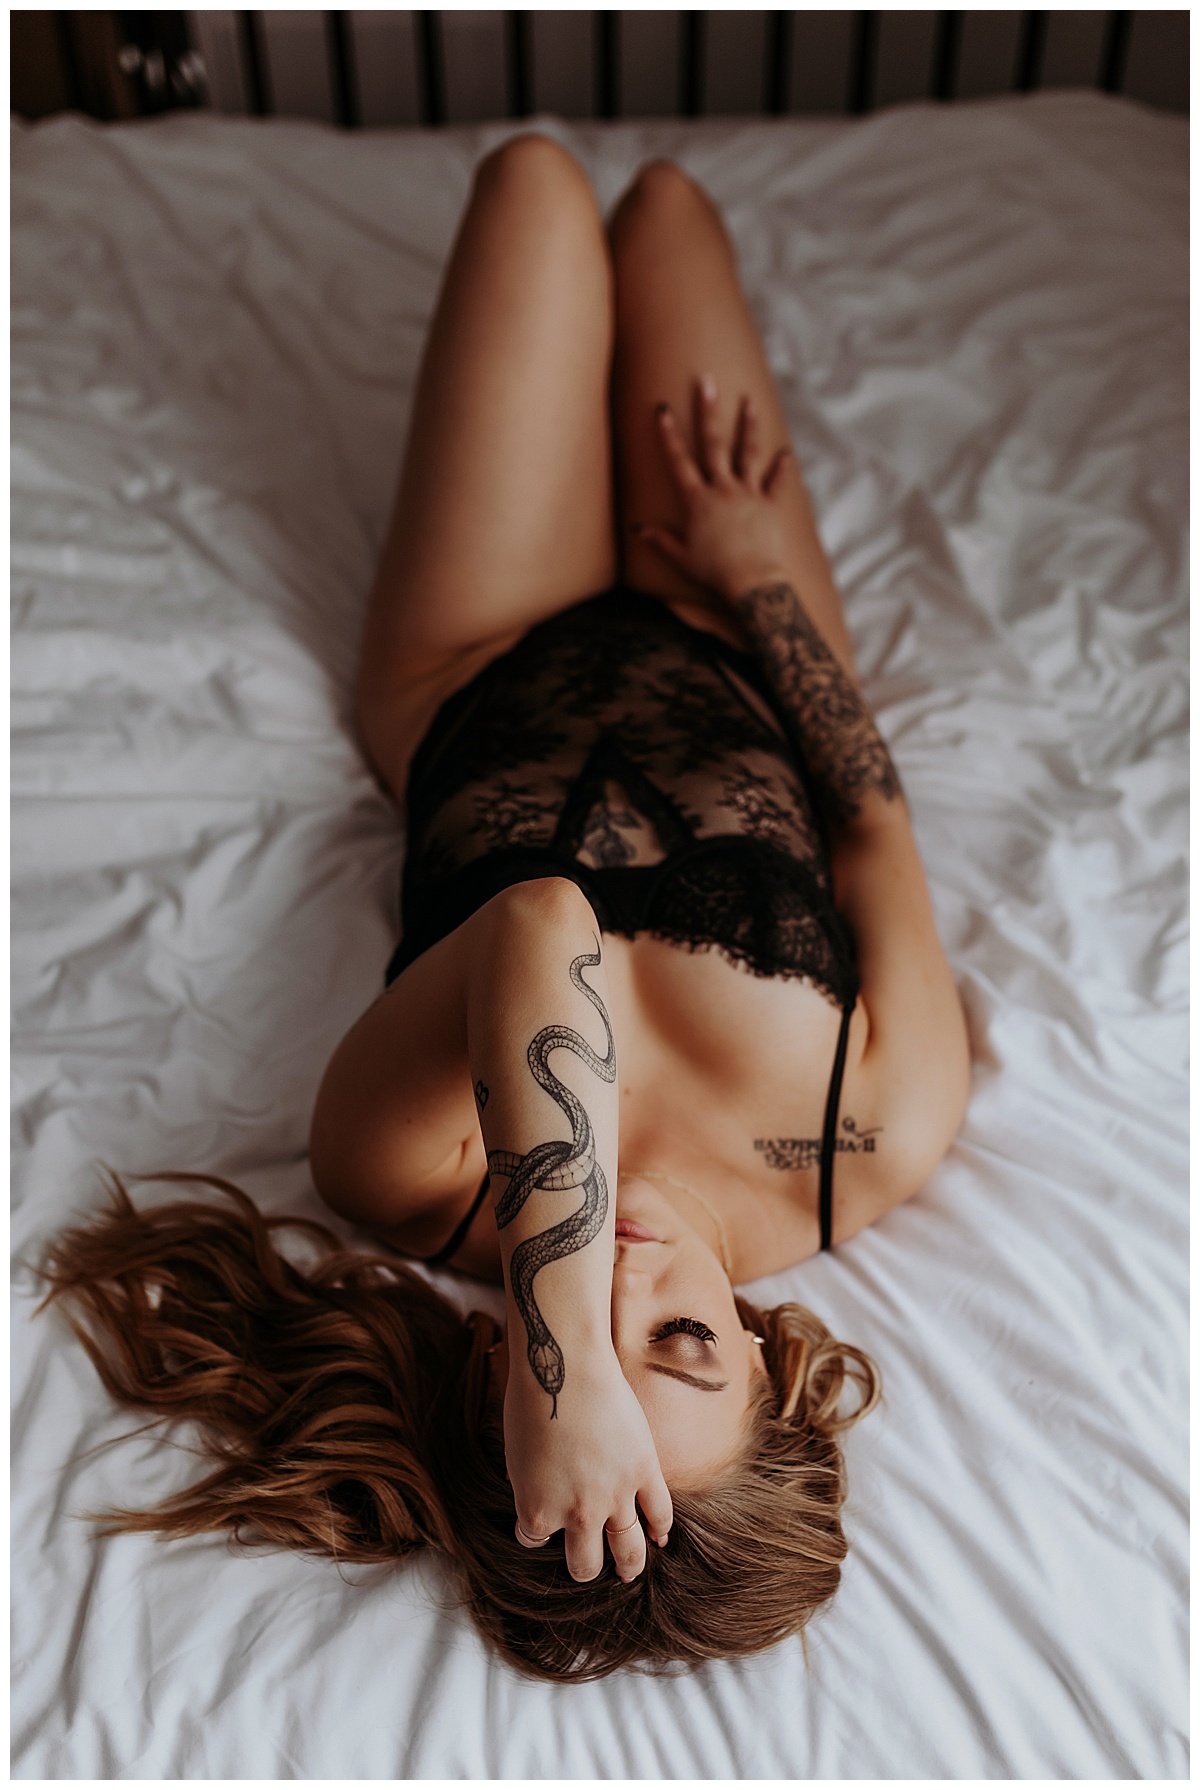 Adult lays on back on bed in Black Lingerie Styles